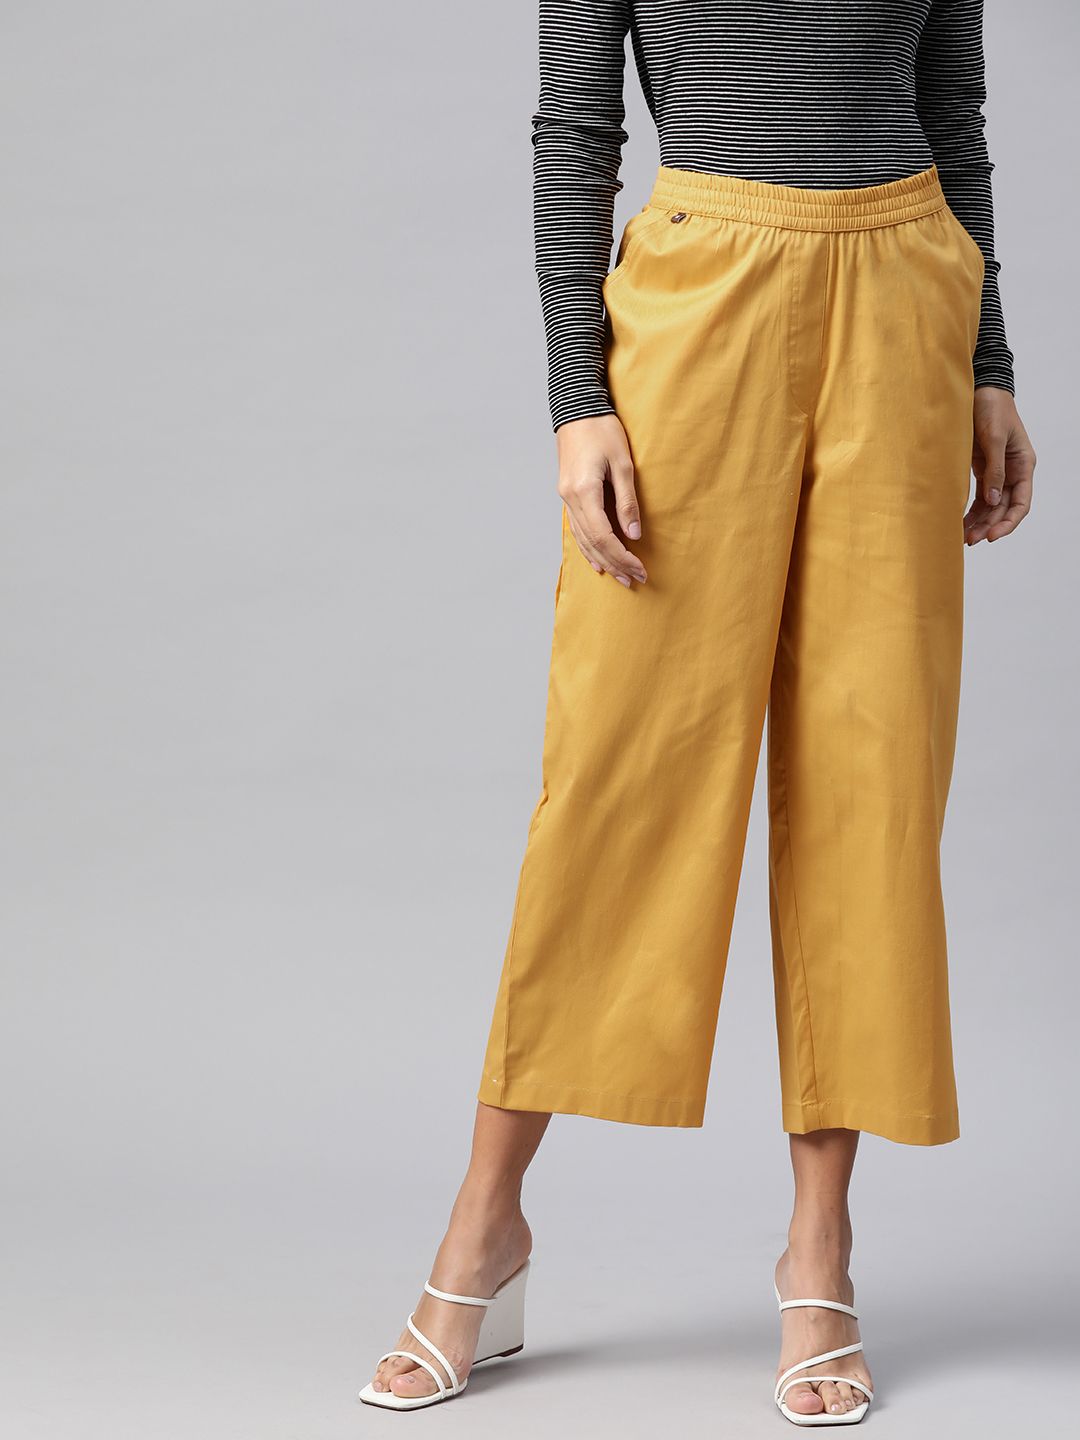 Readiprint Fashions Straight Fit High-Rise Culottes Trousers Price in India